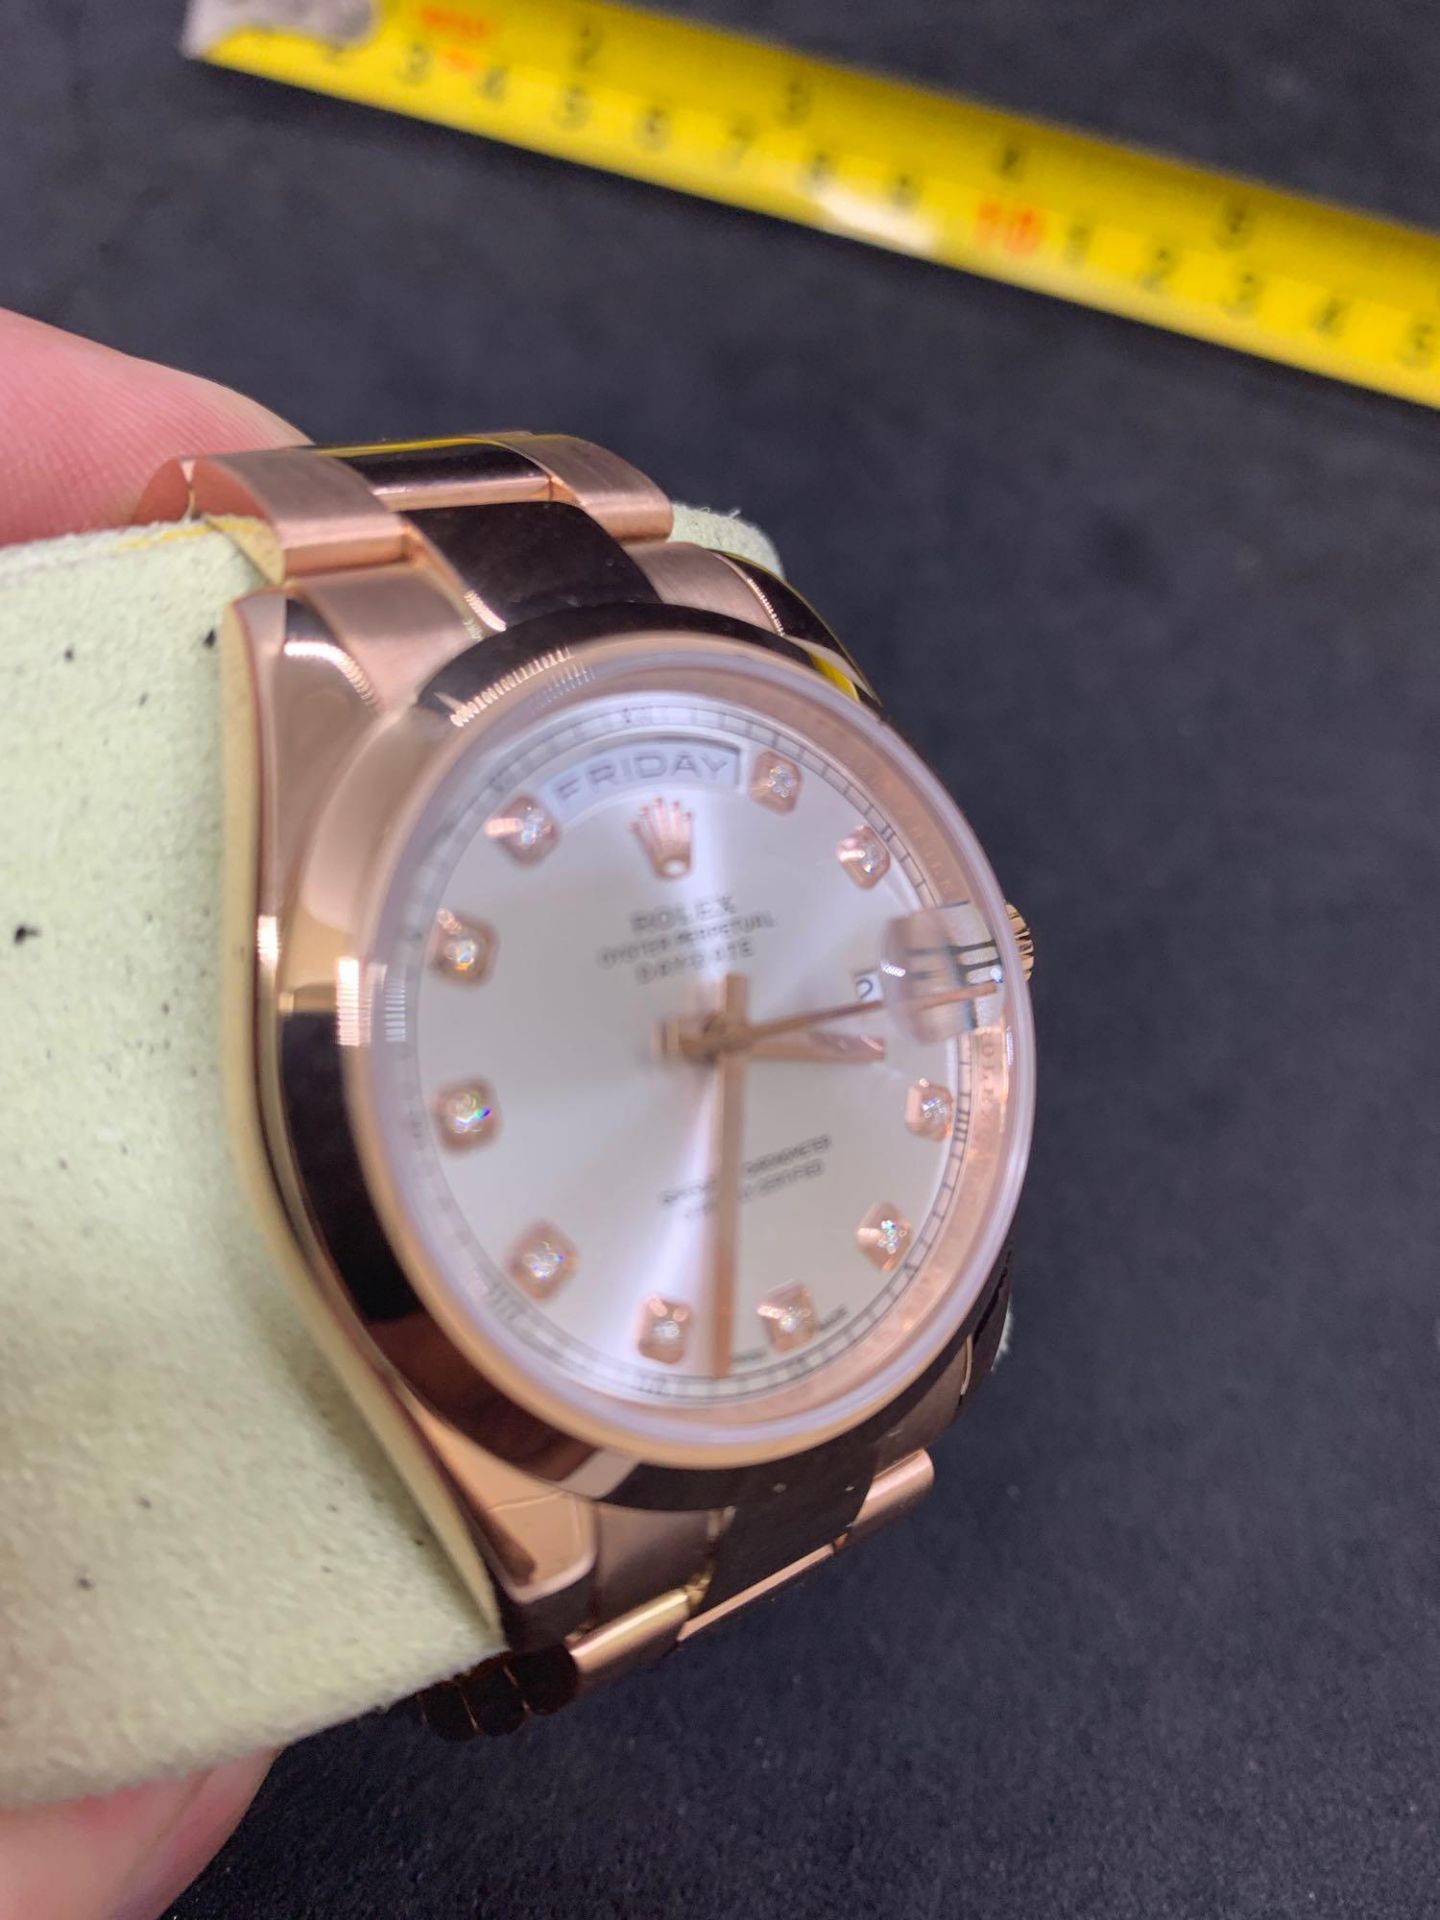 Solid 18ct rose gold watch Marked Rolex fitted with genuine Rolex movement - Image 15 of 18